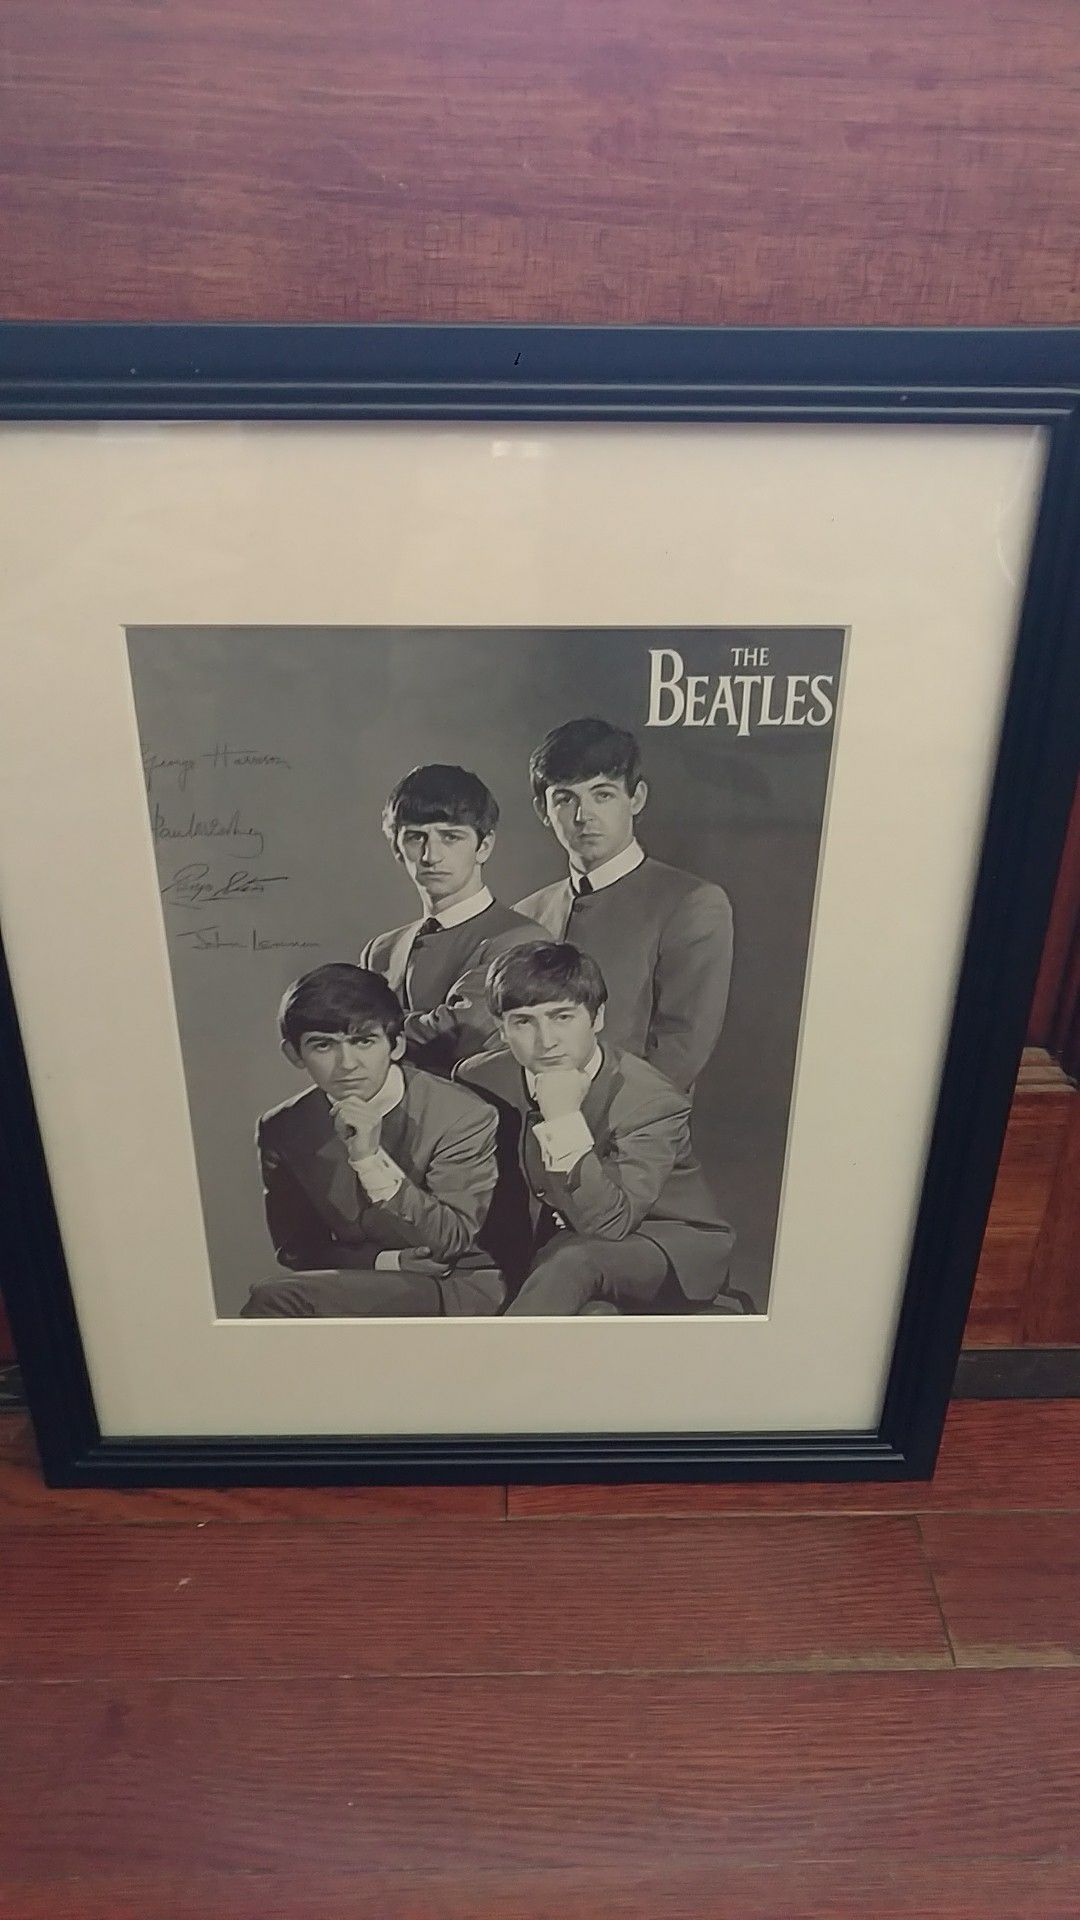 Friend picture of The Beatles I don't know if it's original or not